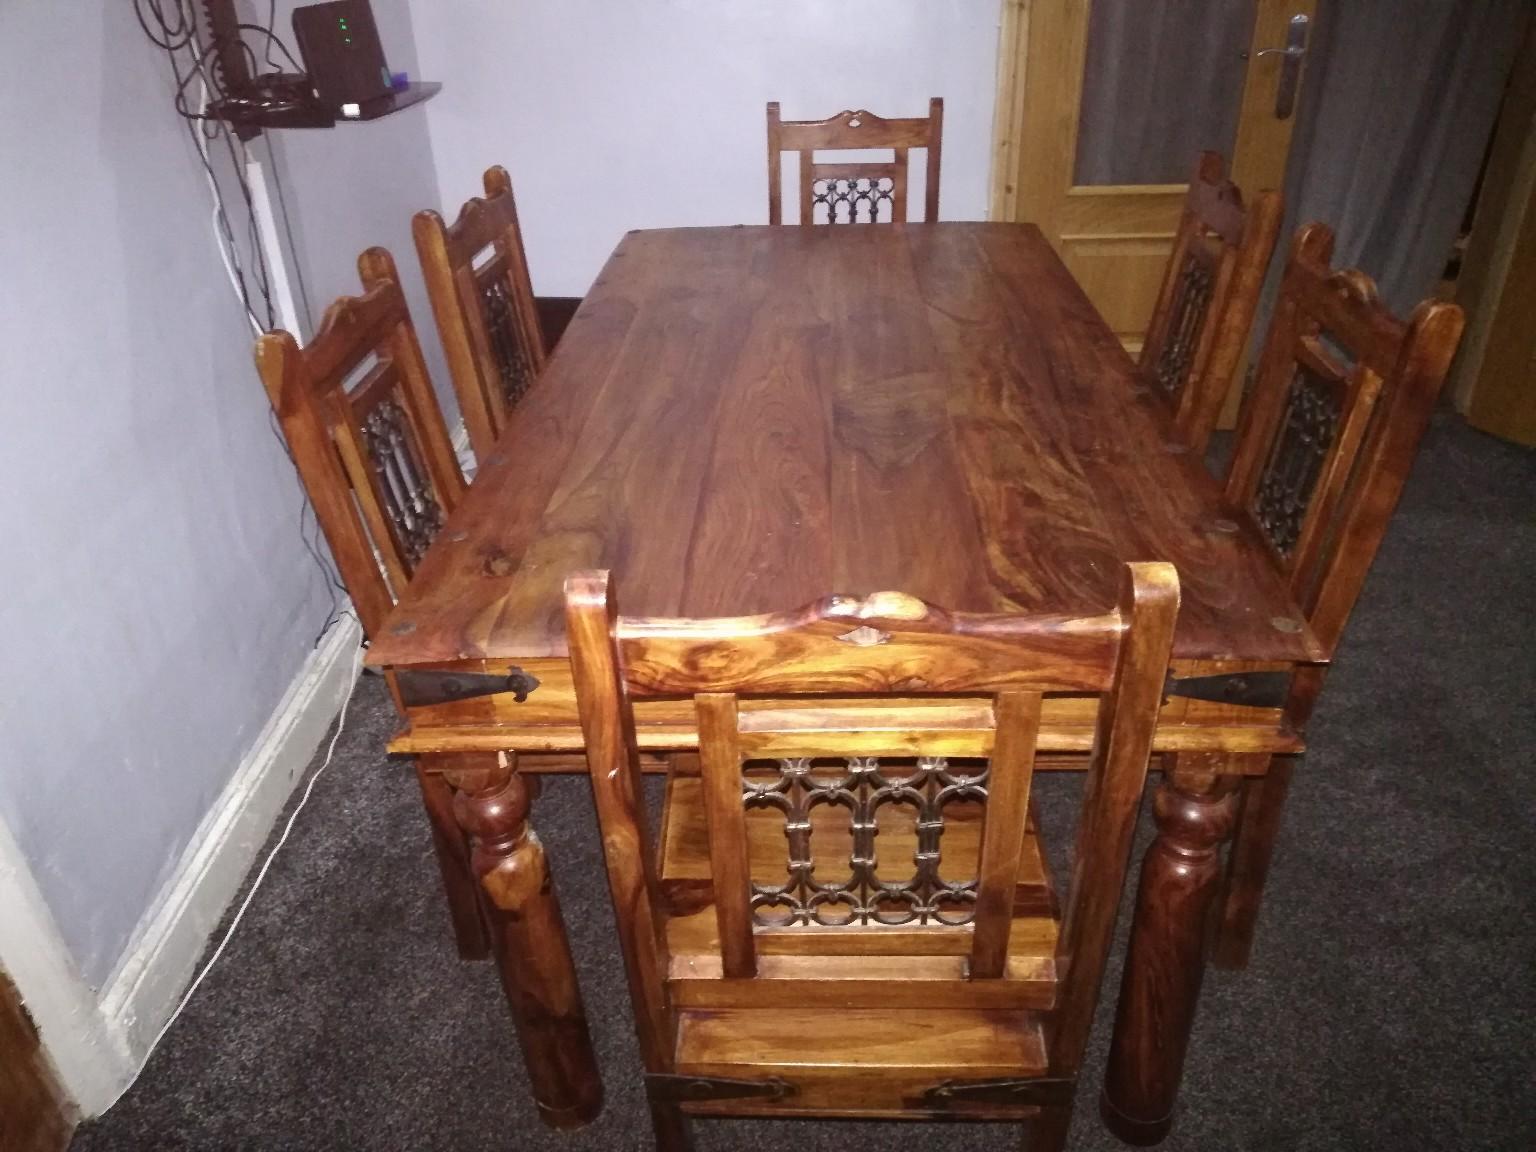 Indian Sheesham Dining Table And 6 Jali Chair In Hx1 Calderdale Fur 225 00 Zum Verkauf Shpock At